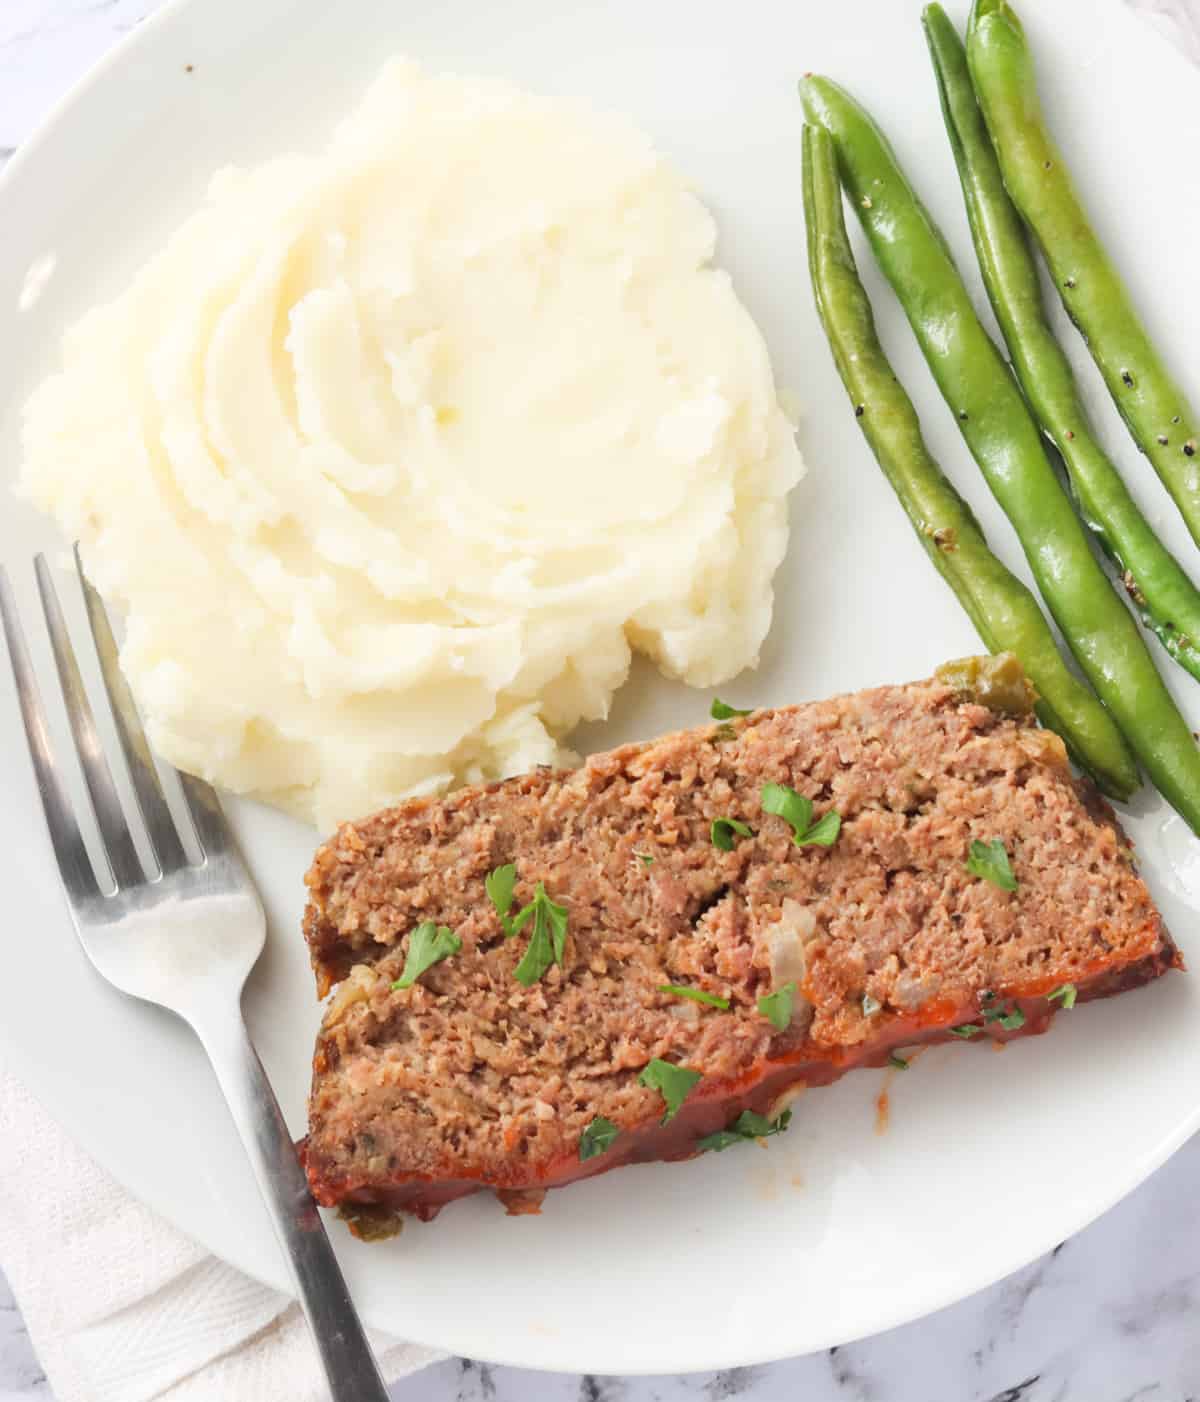 Enjoy Southern Meatloaf with Mashed Potatoes and Roasted Beans